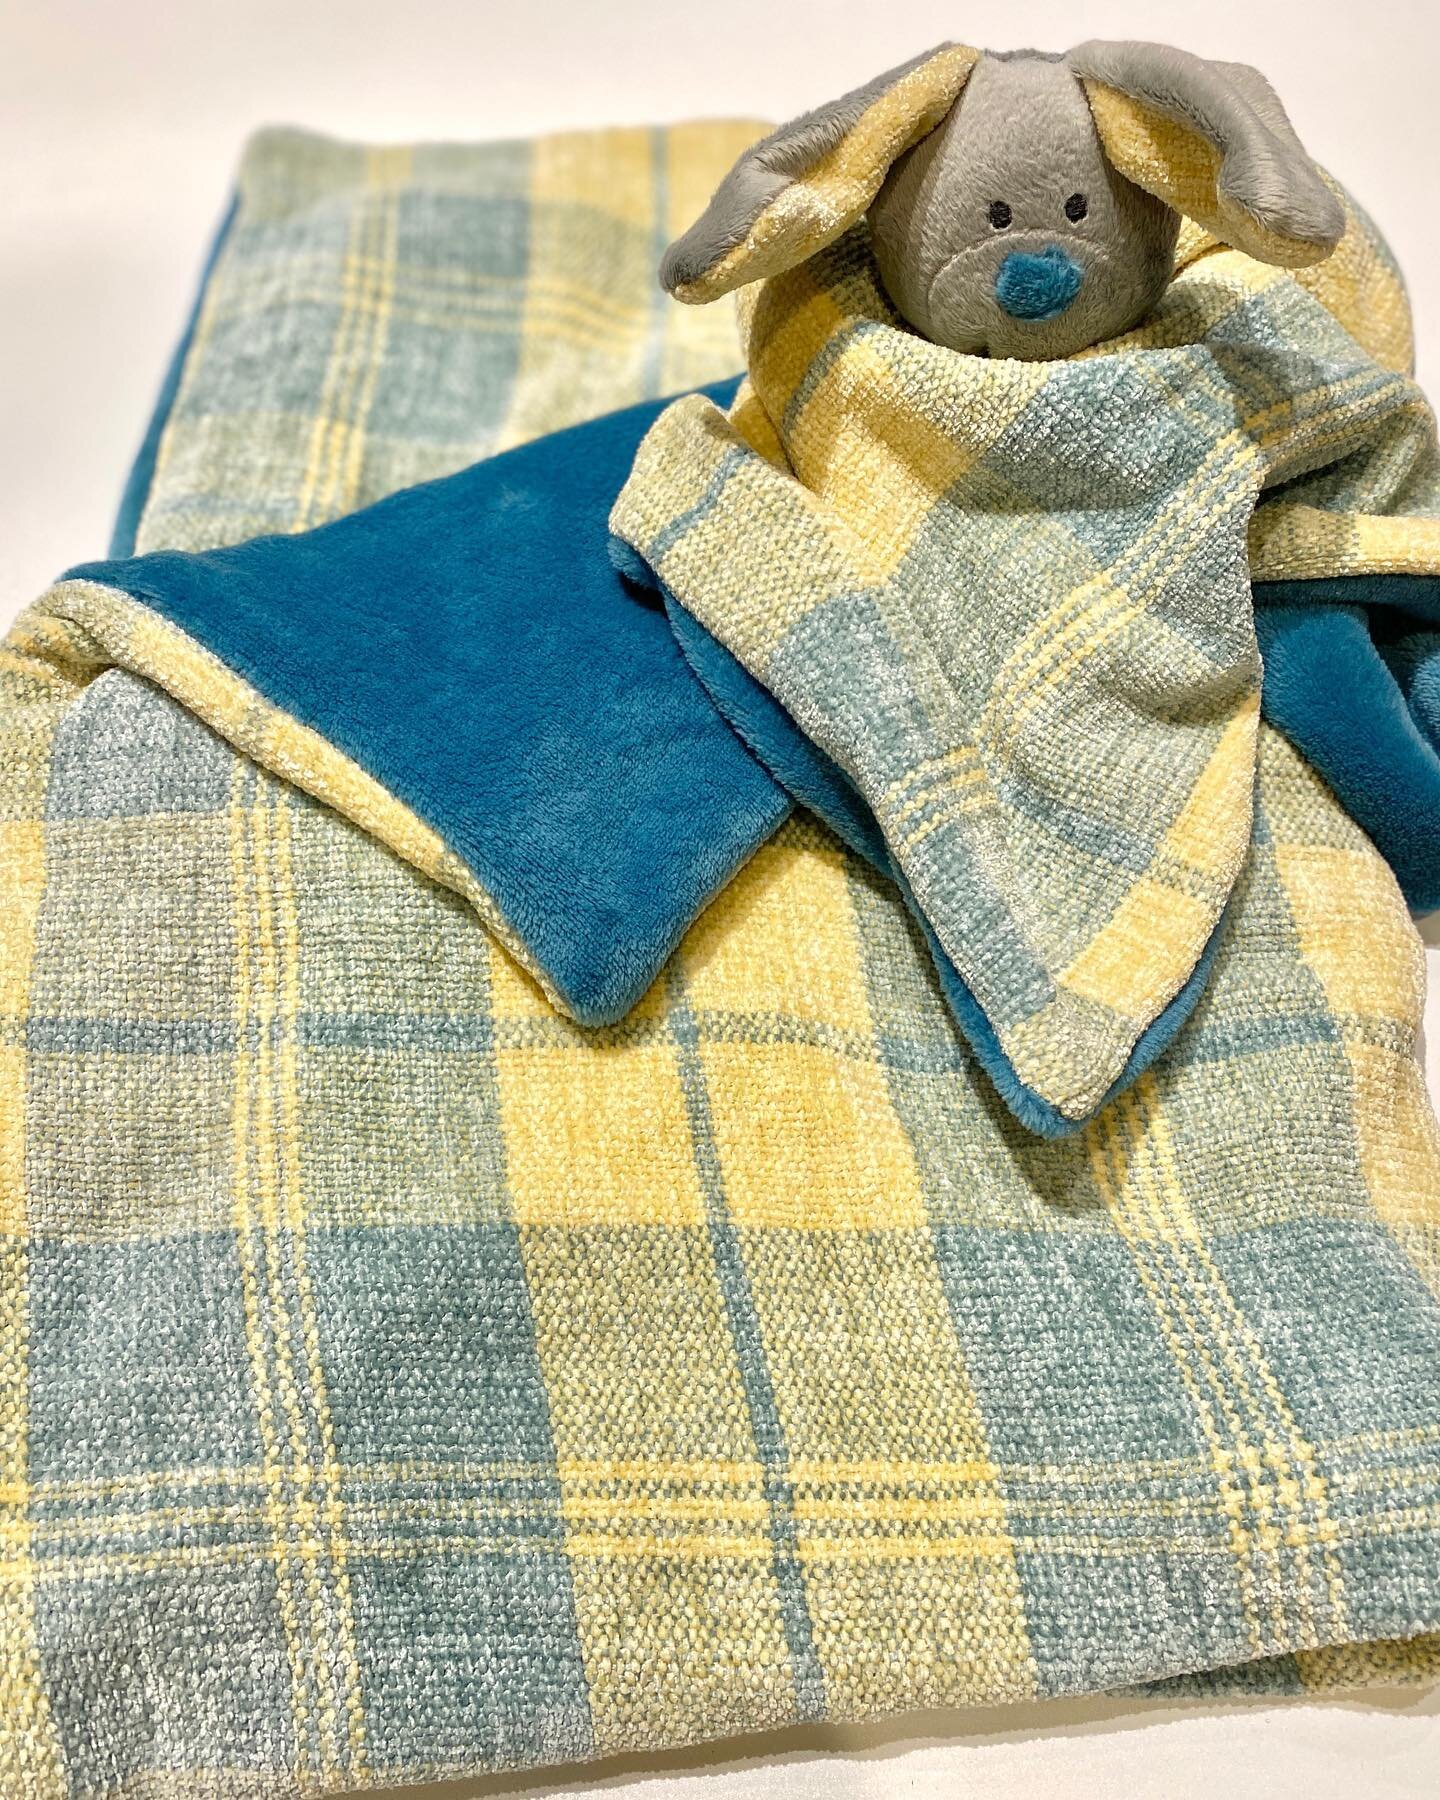 Baby blankets are here and brand new to lexWeaving! Add an additional matching Willow Bean lovey which will make a perfect gift for a new bundle of joy. 
.
.
.
.
#babygift #handmade #weaving #babyshower #babyblankets #securityblanket #loveyblanket